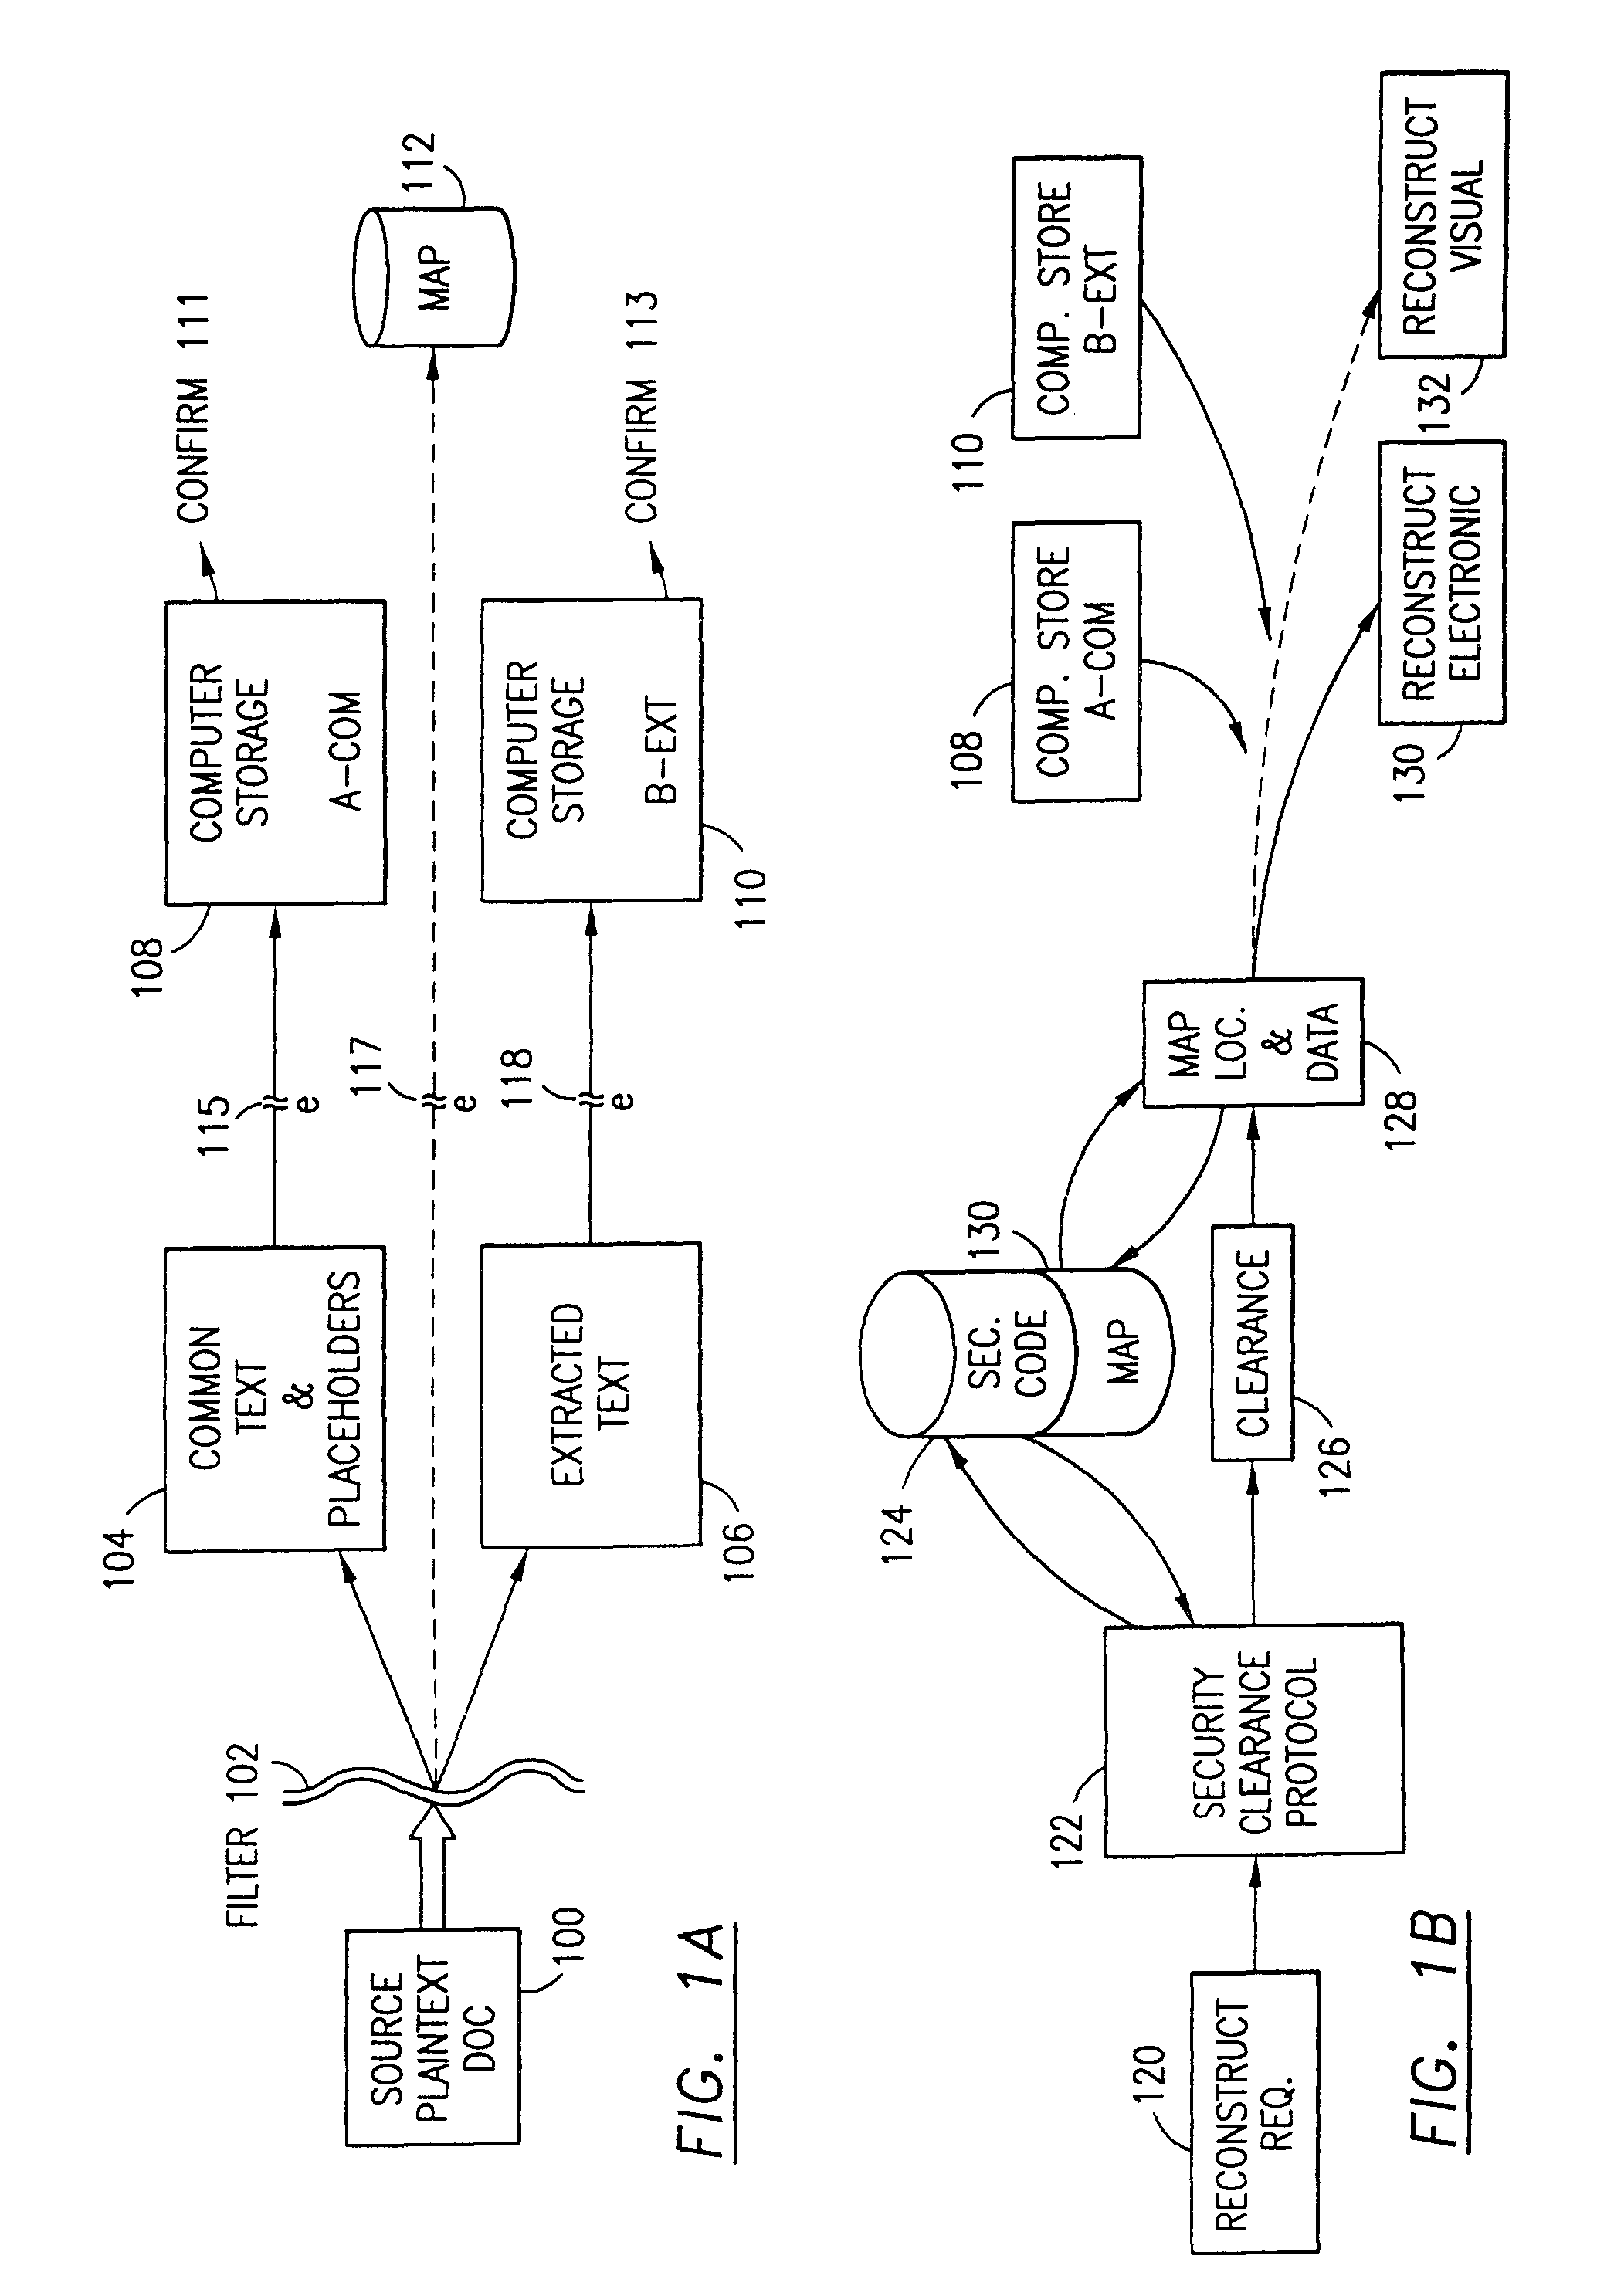 Data security system and method with parsing and dispersion techniques